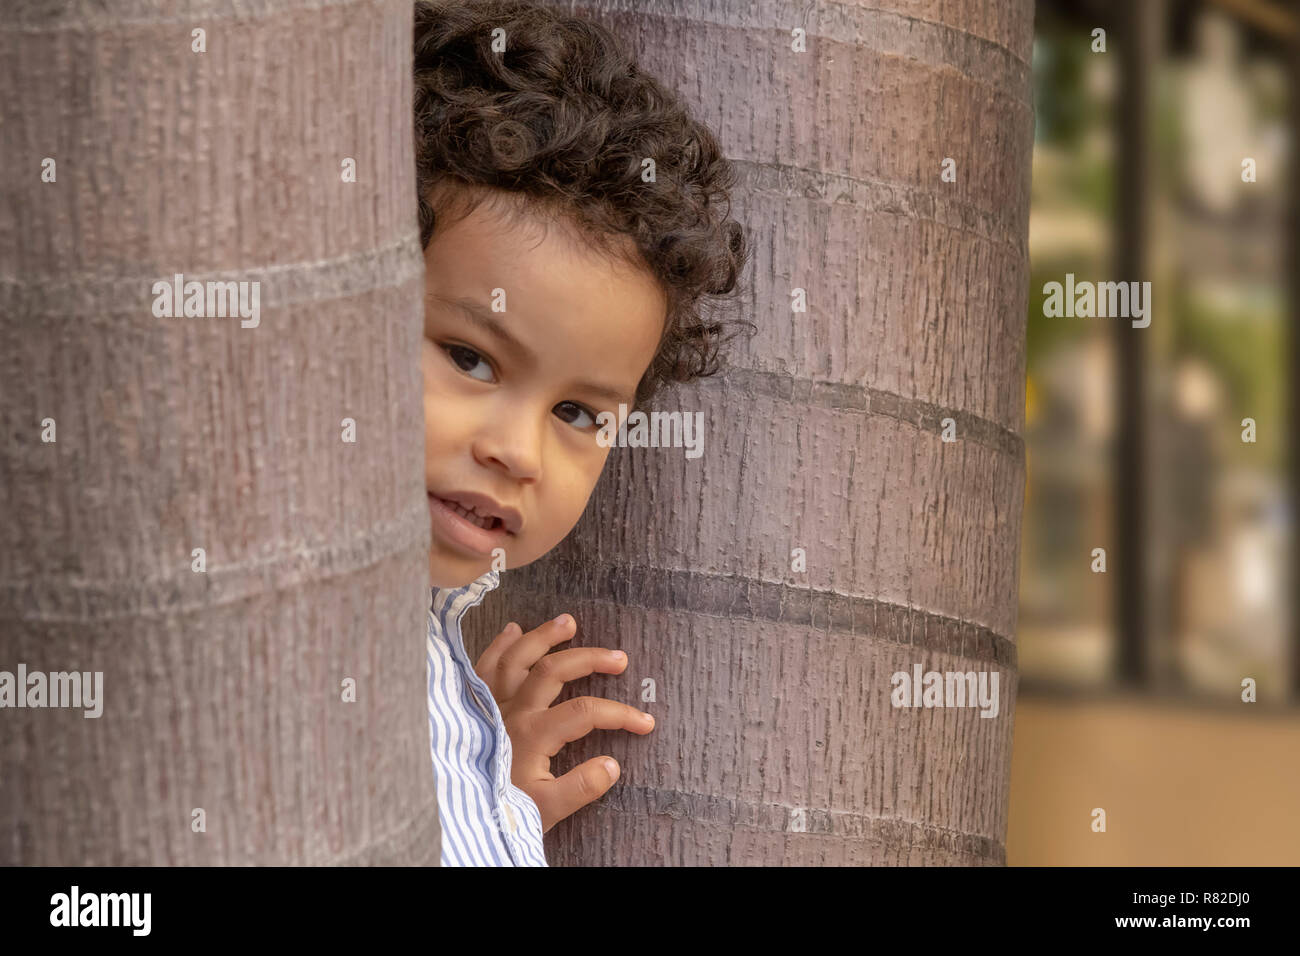 A curious little boy peeks at the camera while in between two trees. Out on the sidewalk, an inquisitive boy hides behind trees while he looks. Stock Photo